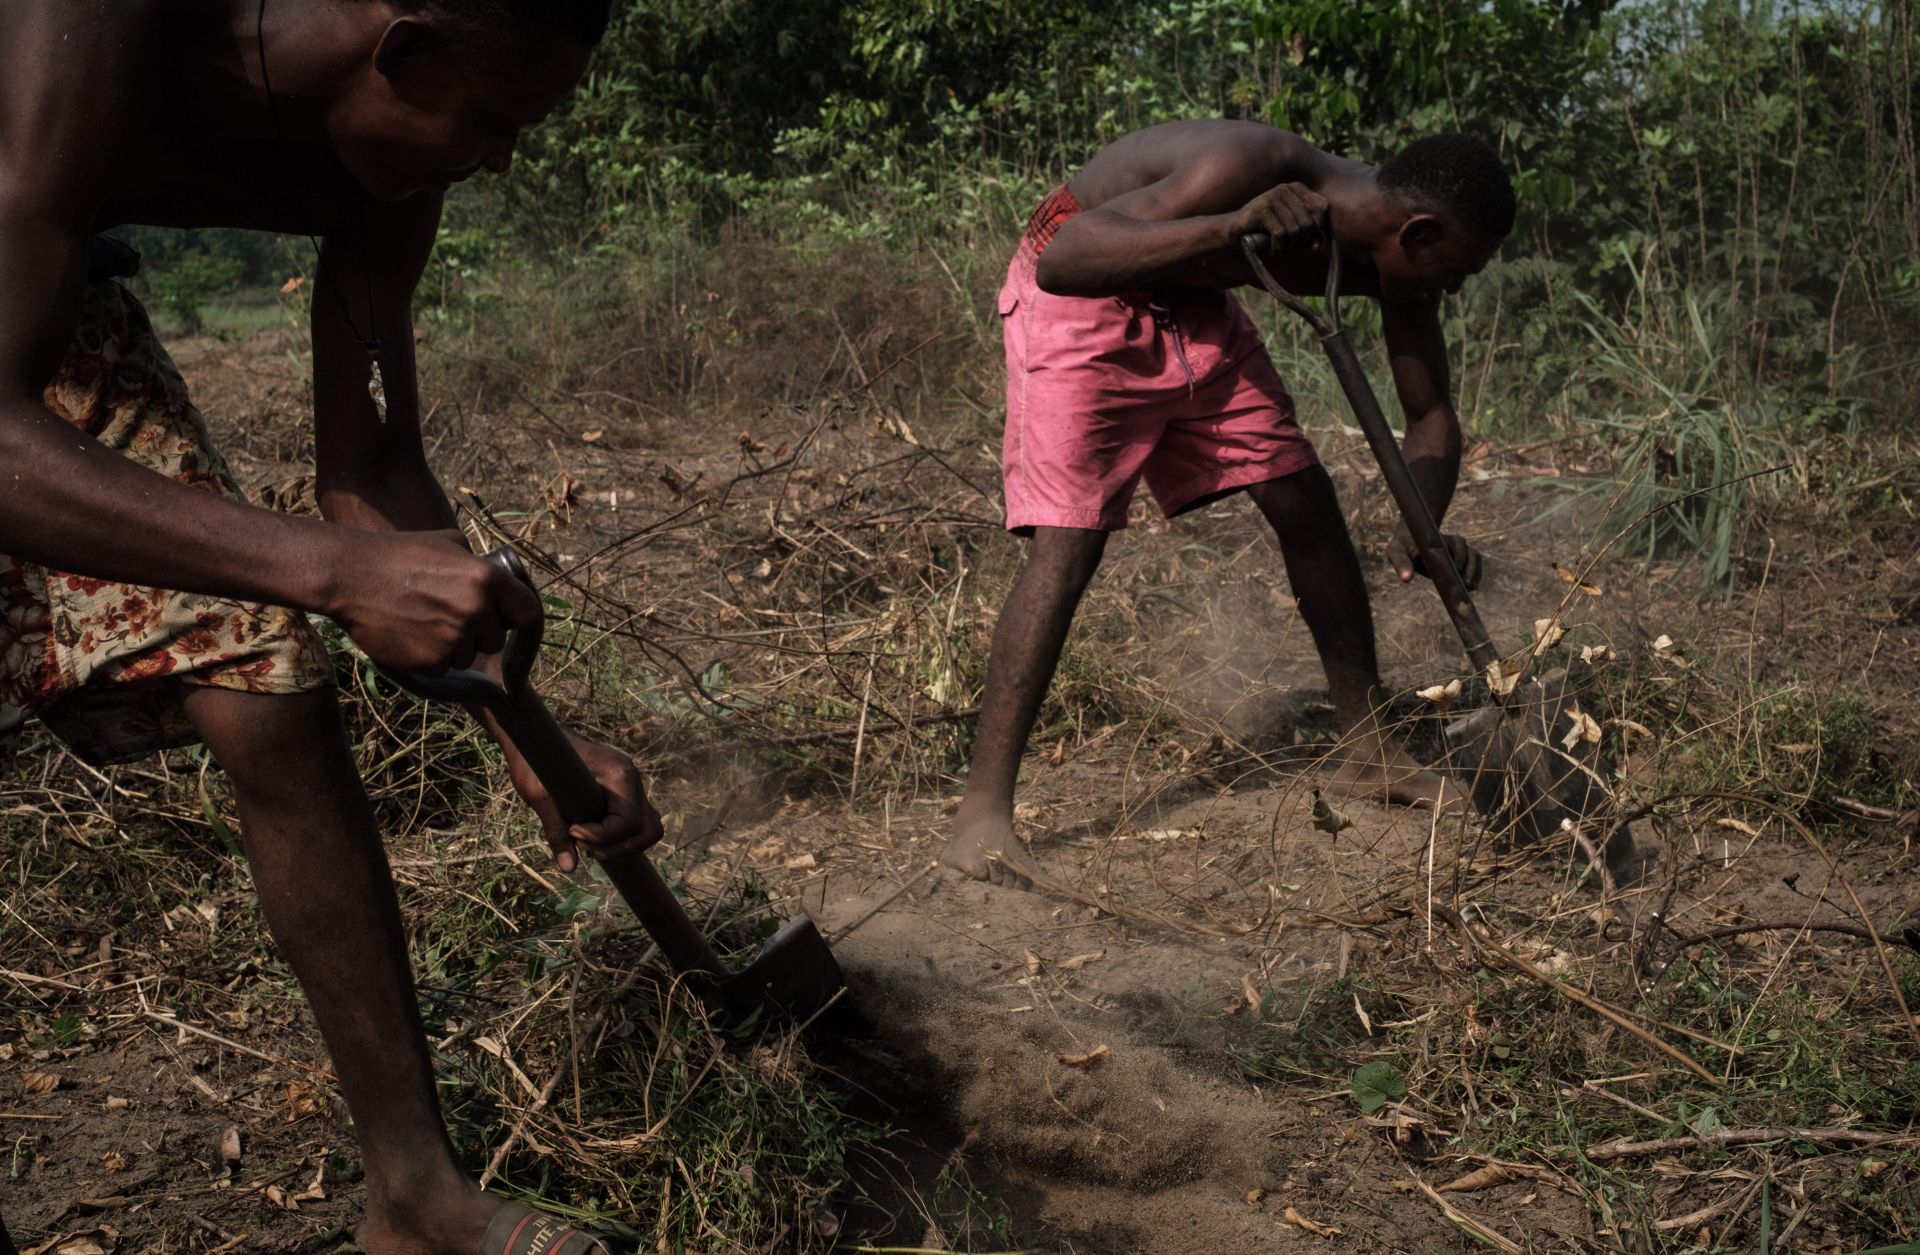 Workers clear land for cassava planting near the village of K-Dere near Bodo, part of the Niger Delta region in Nigeria.